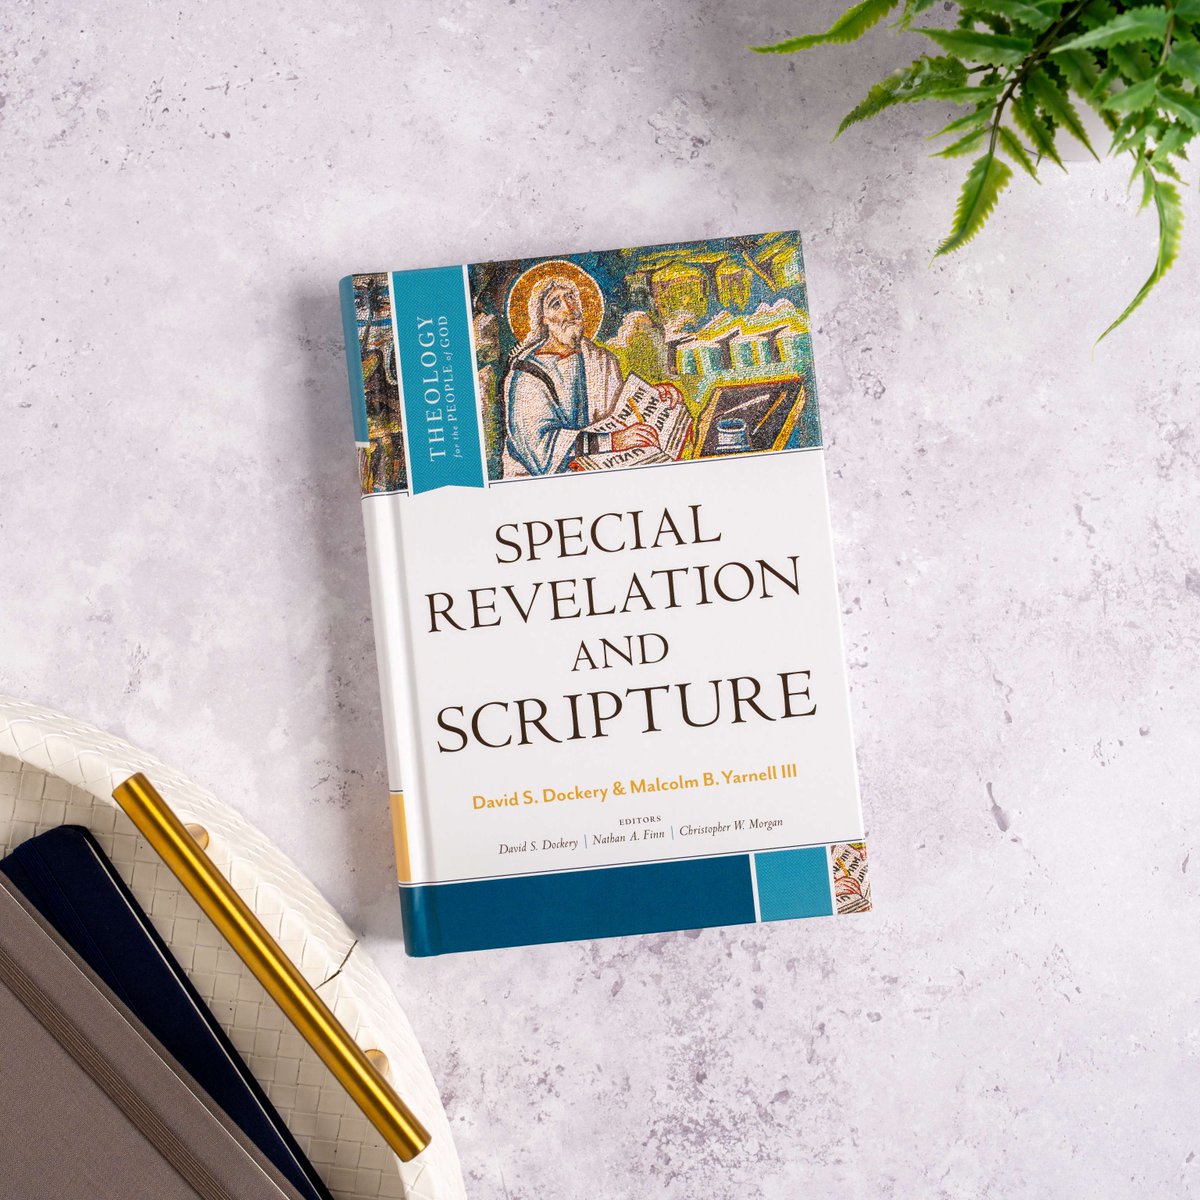 AVAILABLE NOW: Special Revelation and Scripture @DavidSDockery and @MusingsOnChrist explore the fundamental elements of divine revelation and how these elements influence and shape the Christian's understanding of theology, ethics, and worldview. lfwy.co/GIV150Rr4rx